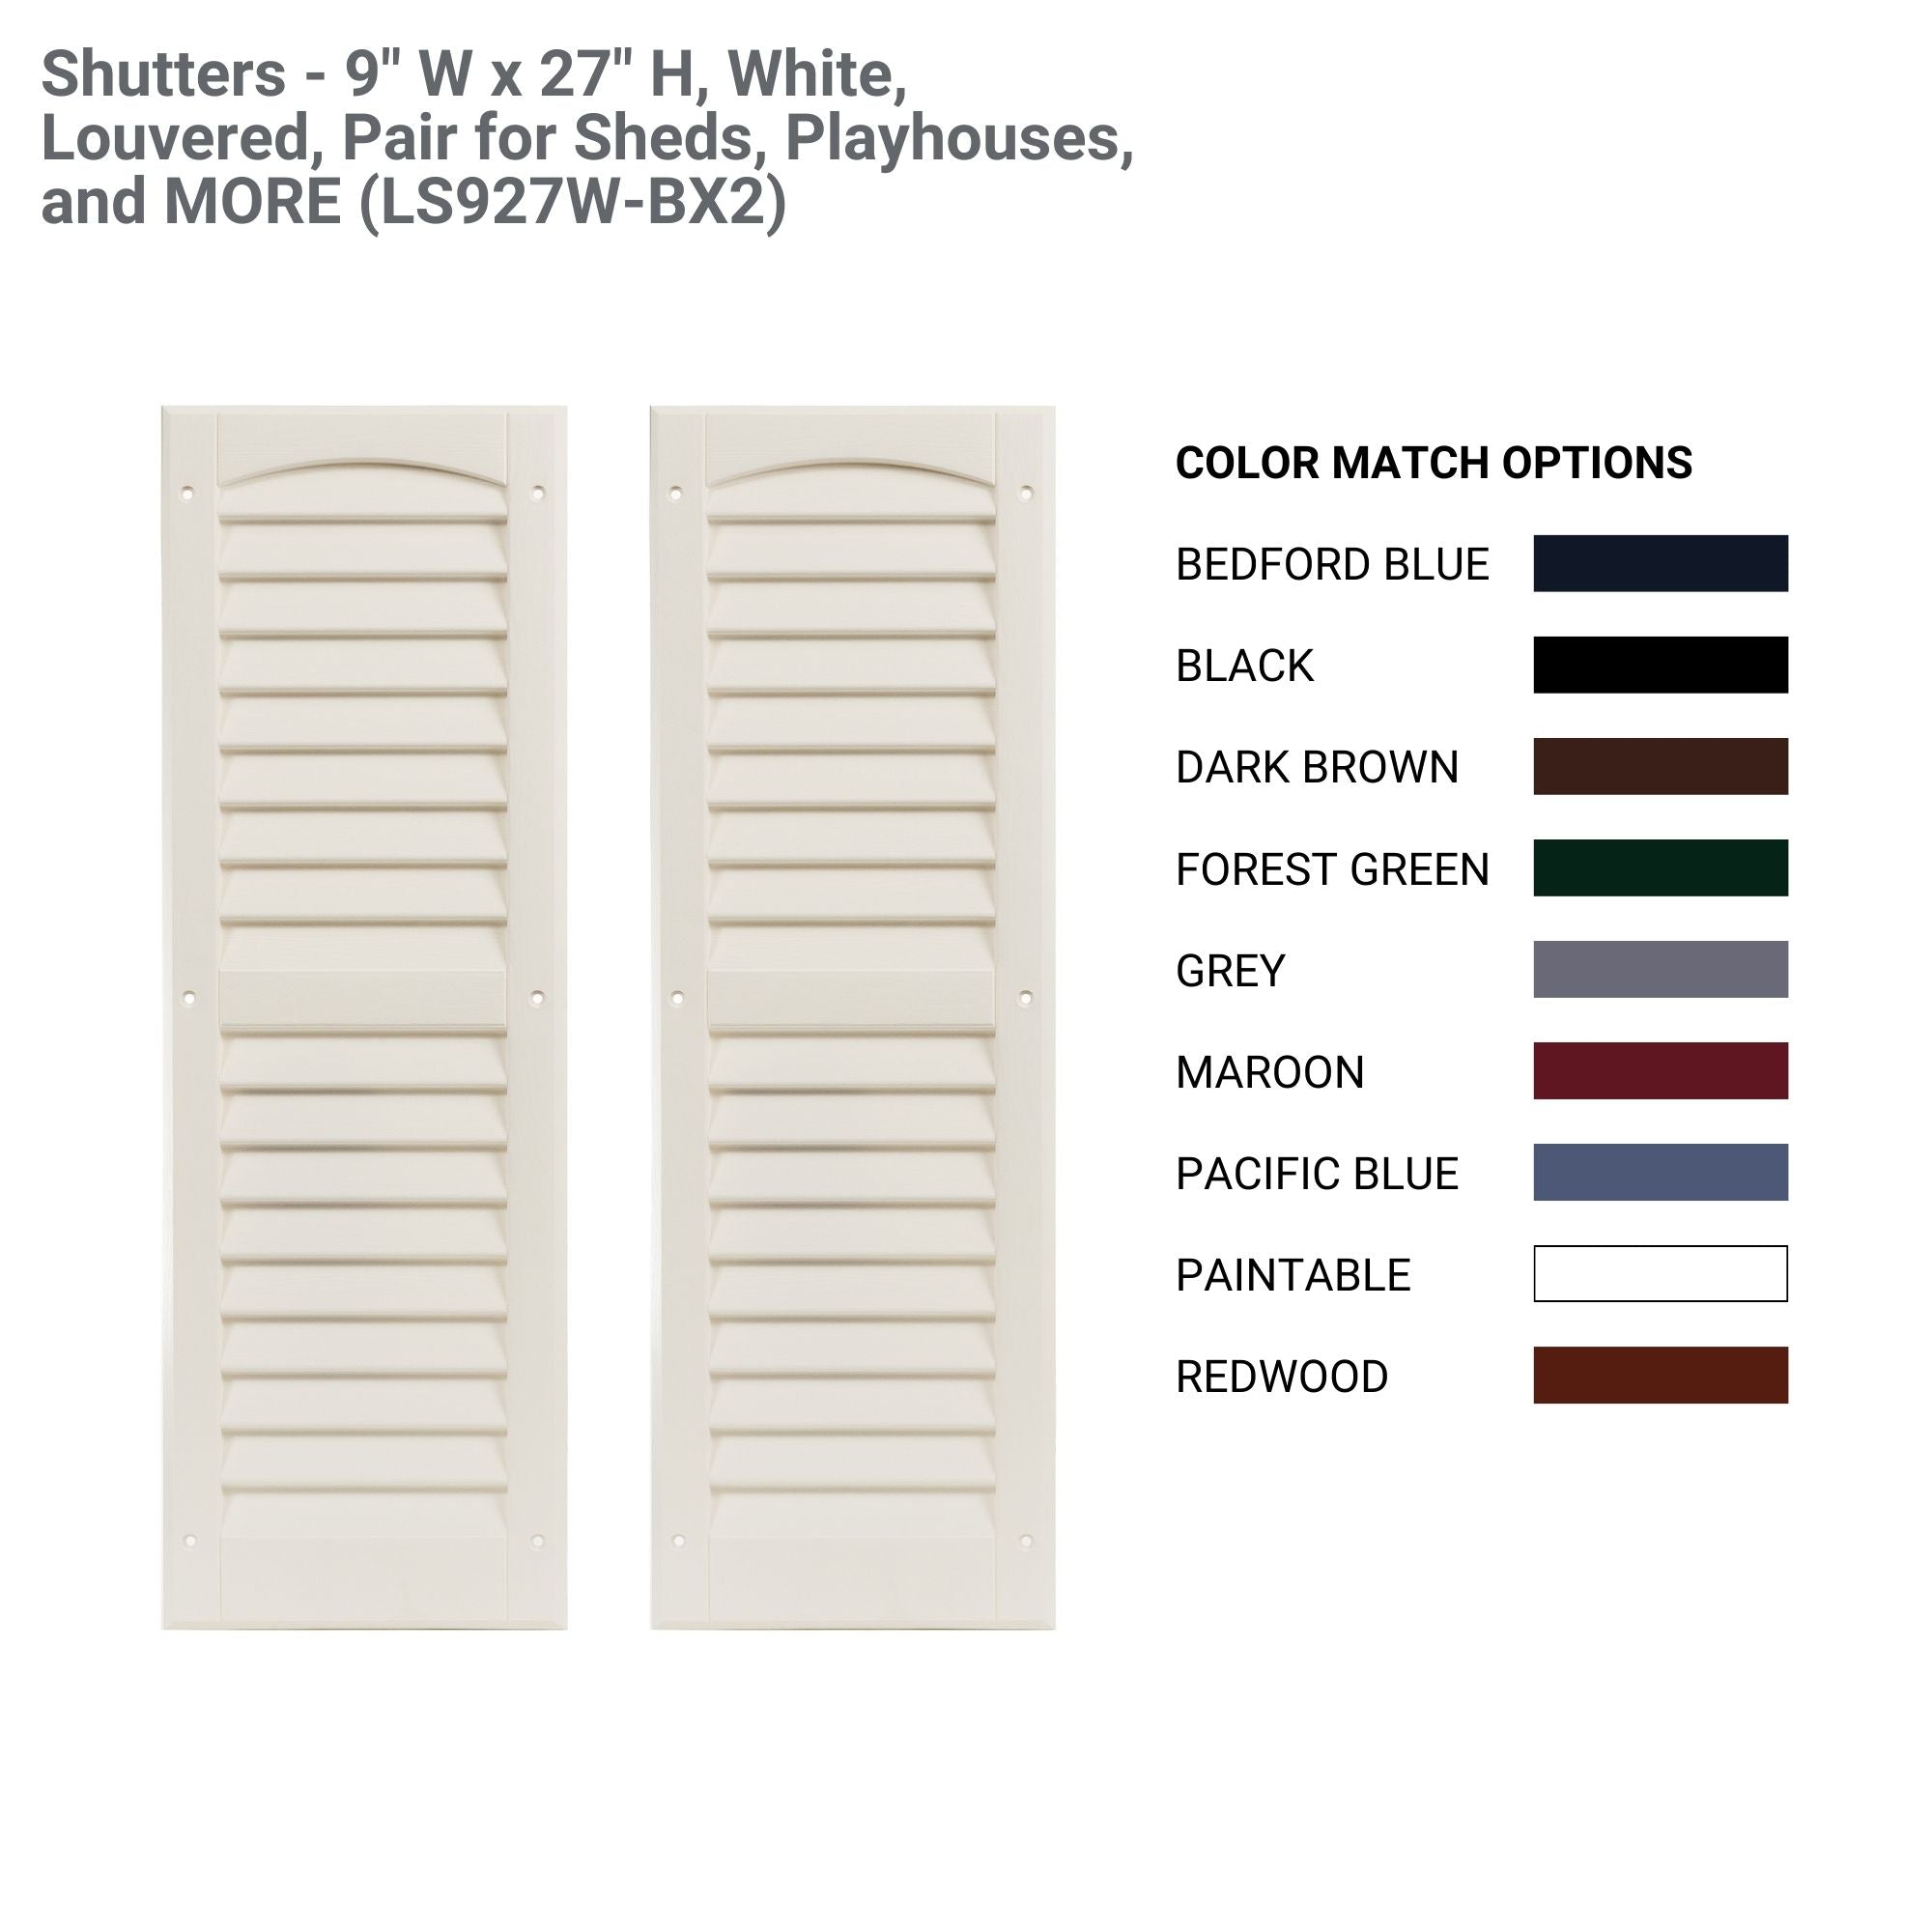 Shutters - 9" W x 27" H Louvered Shutters, 1 Pair